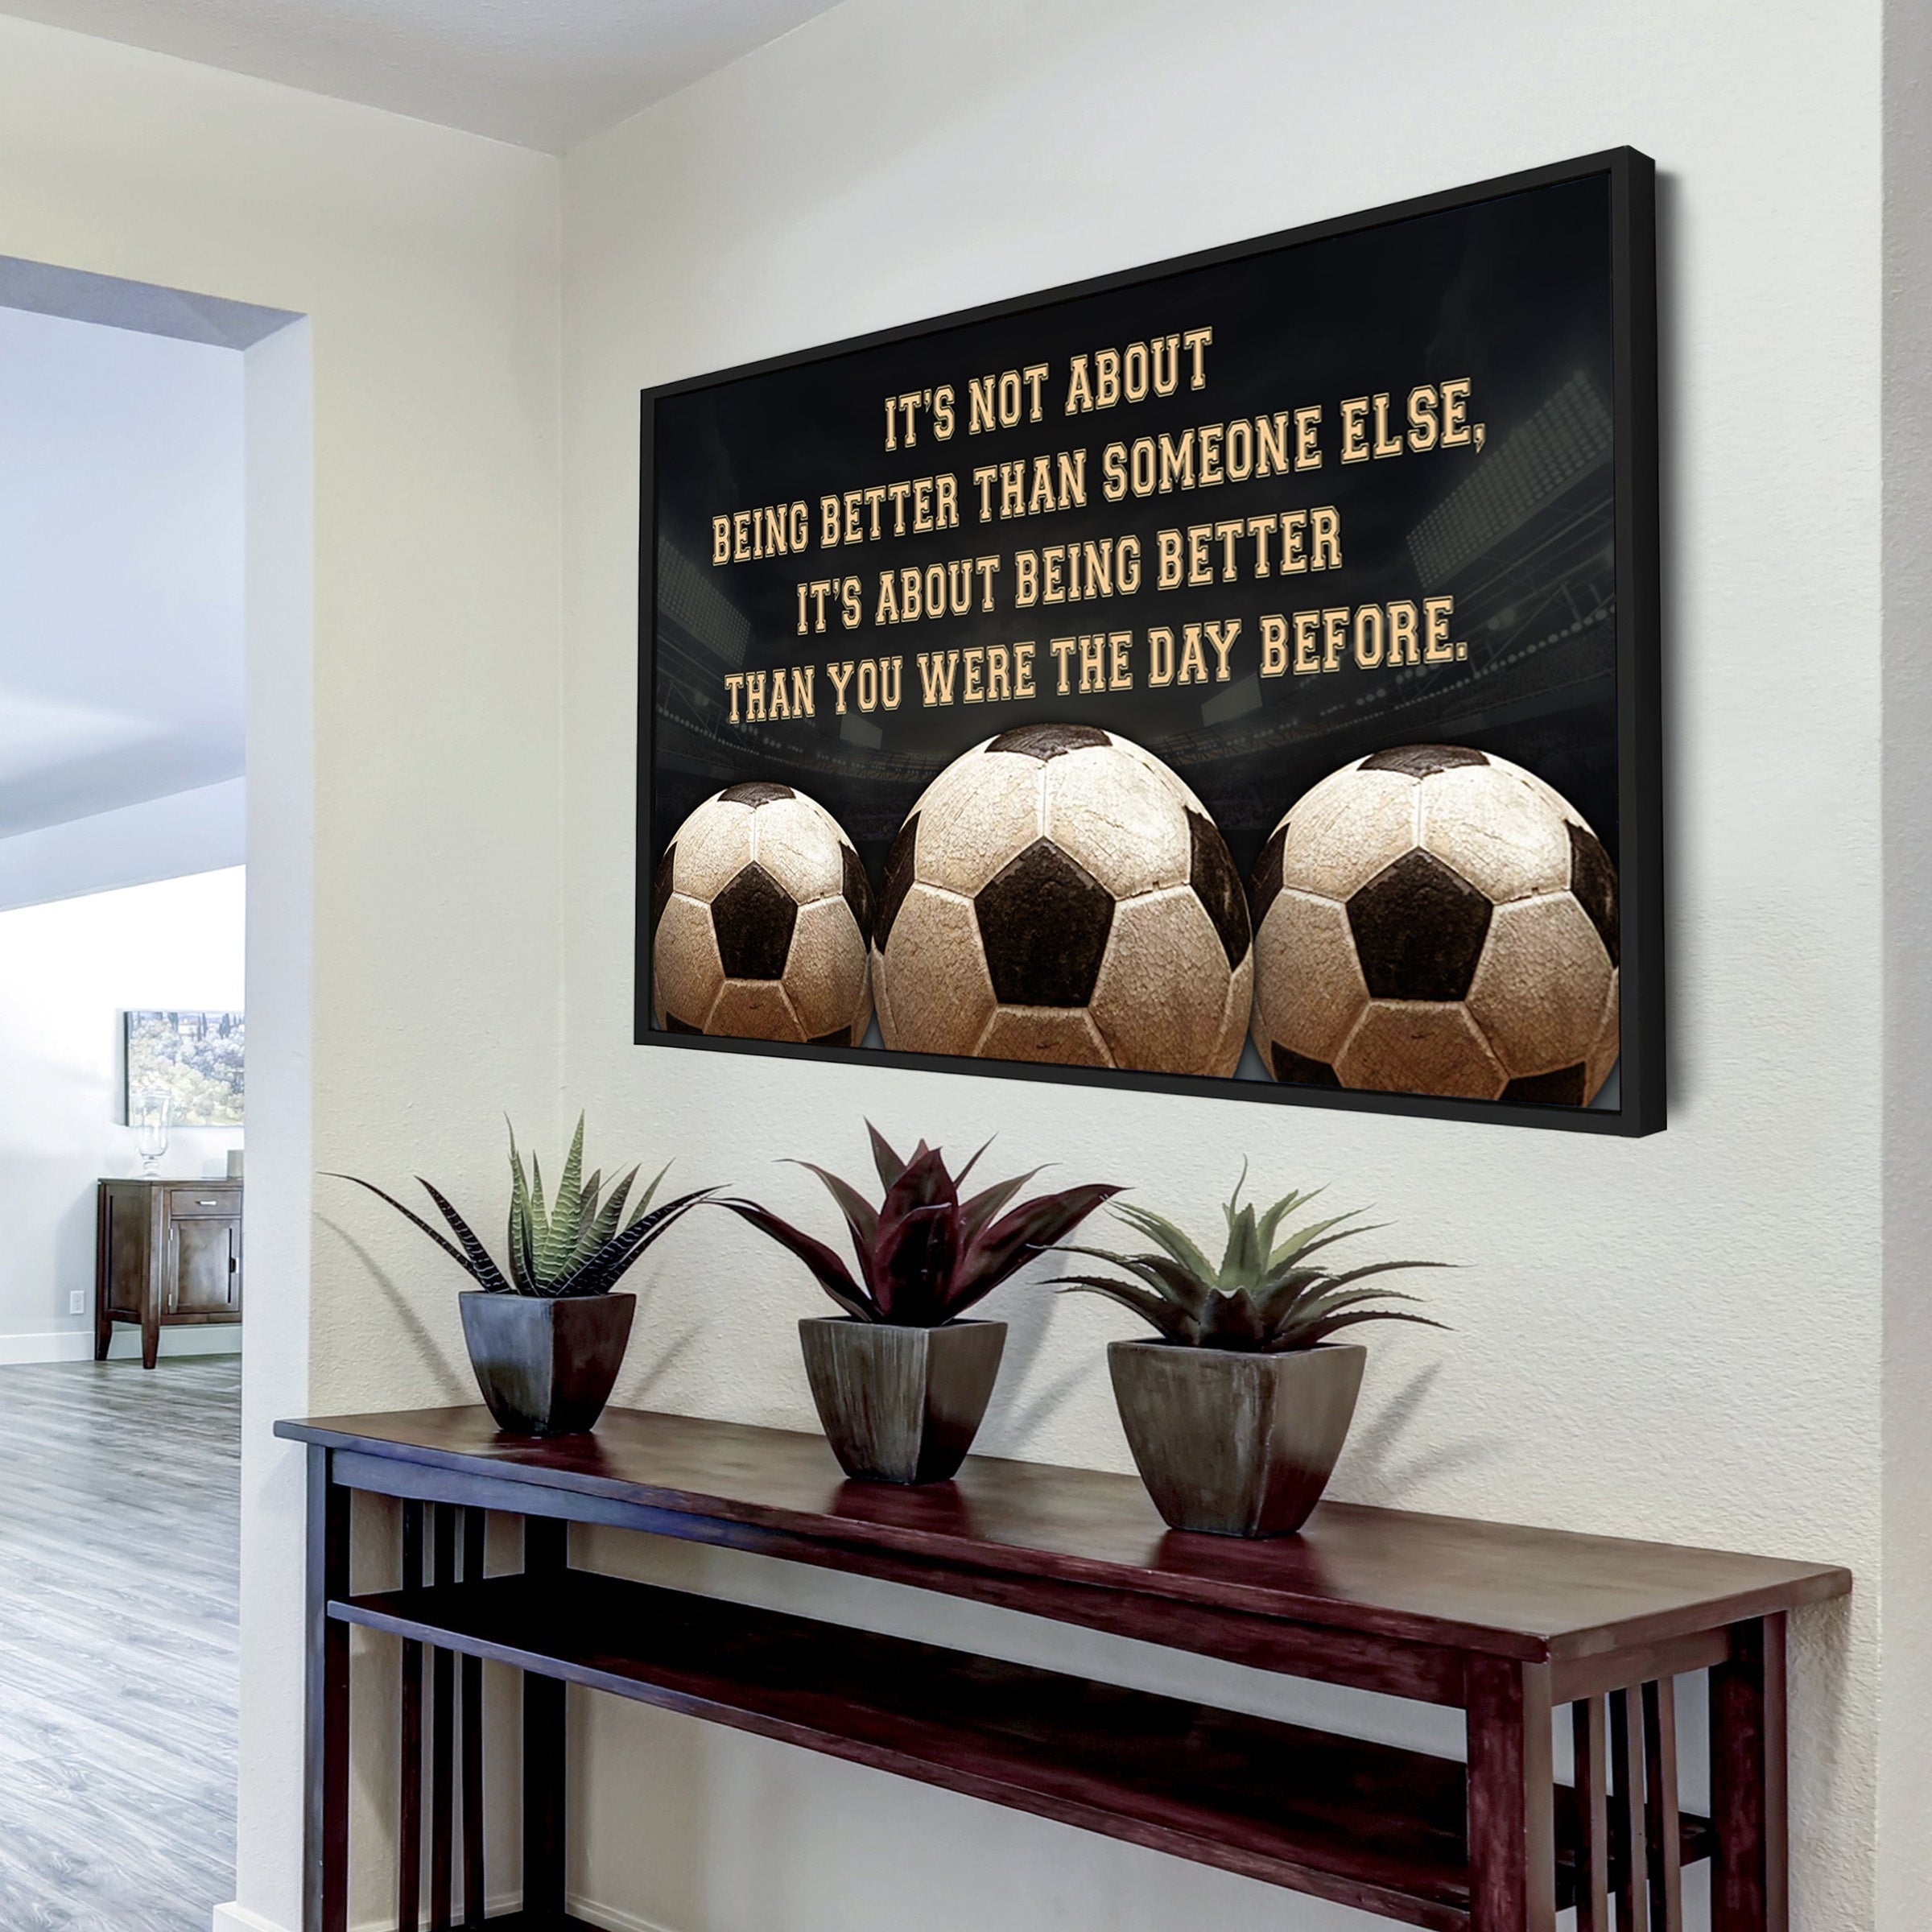 Soccer customizable poster canvas